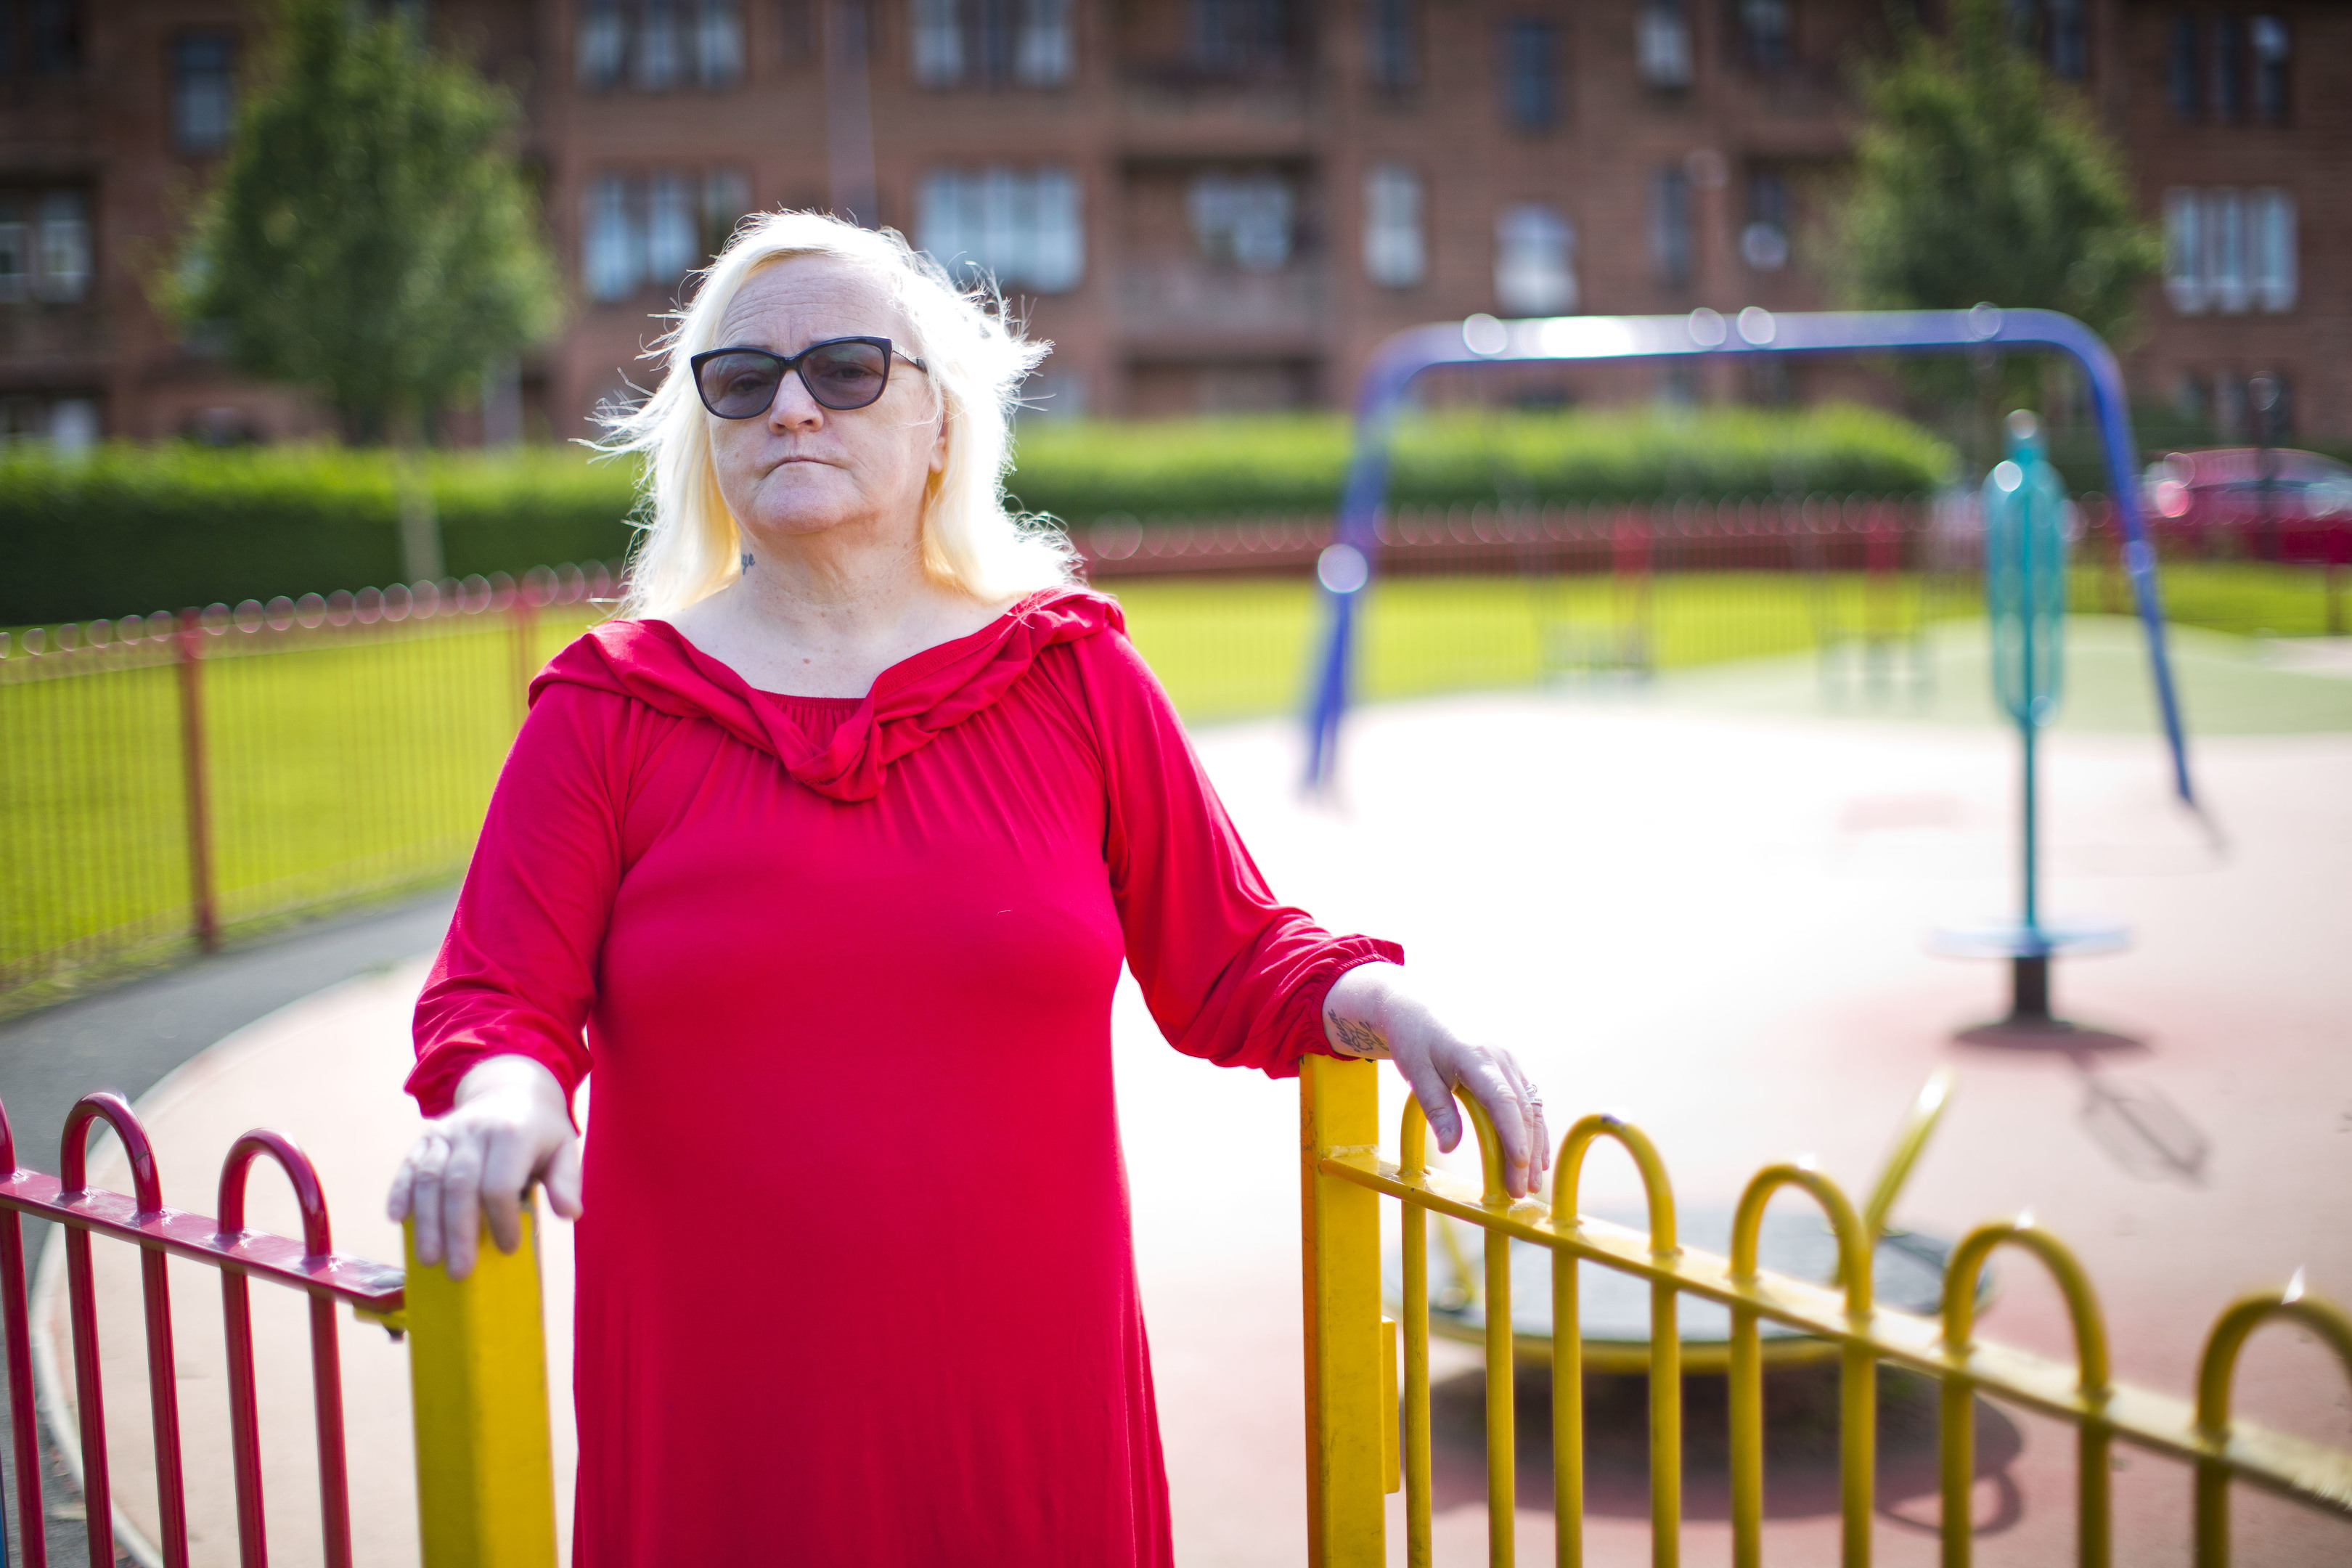 Marie Peachey spent five years at Smyllum Park in the ’60s and claims she was regularly beaten by staff there (Pic: Jamie Williamson)